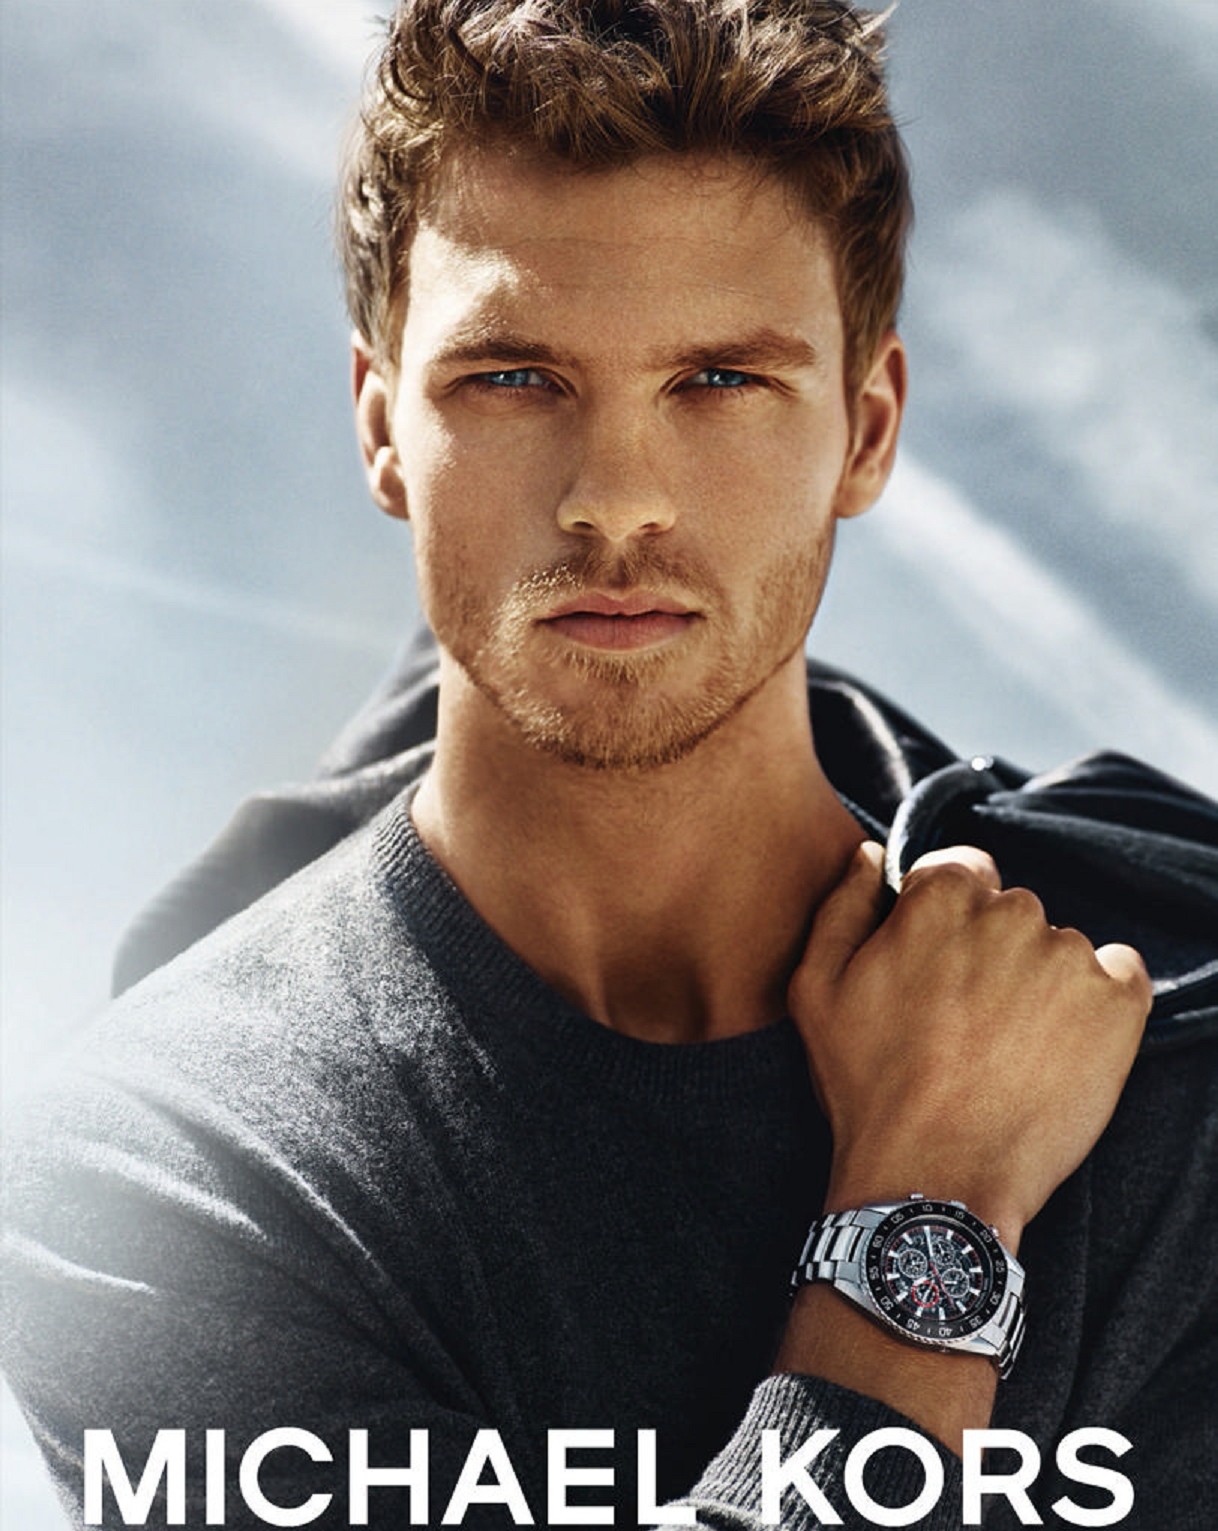 Michael Kors JetMaster Spring 2015 Watch Campaign